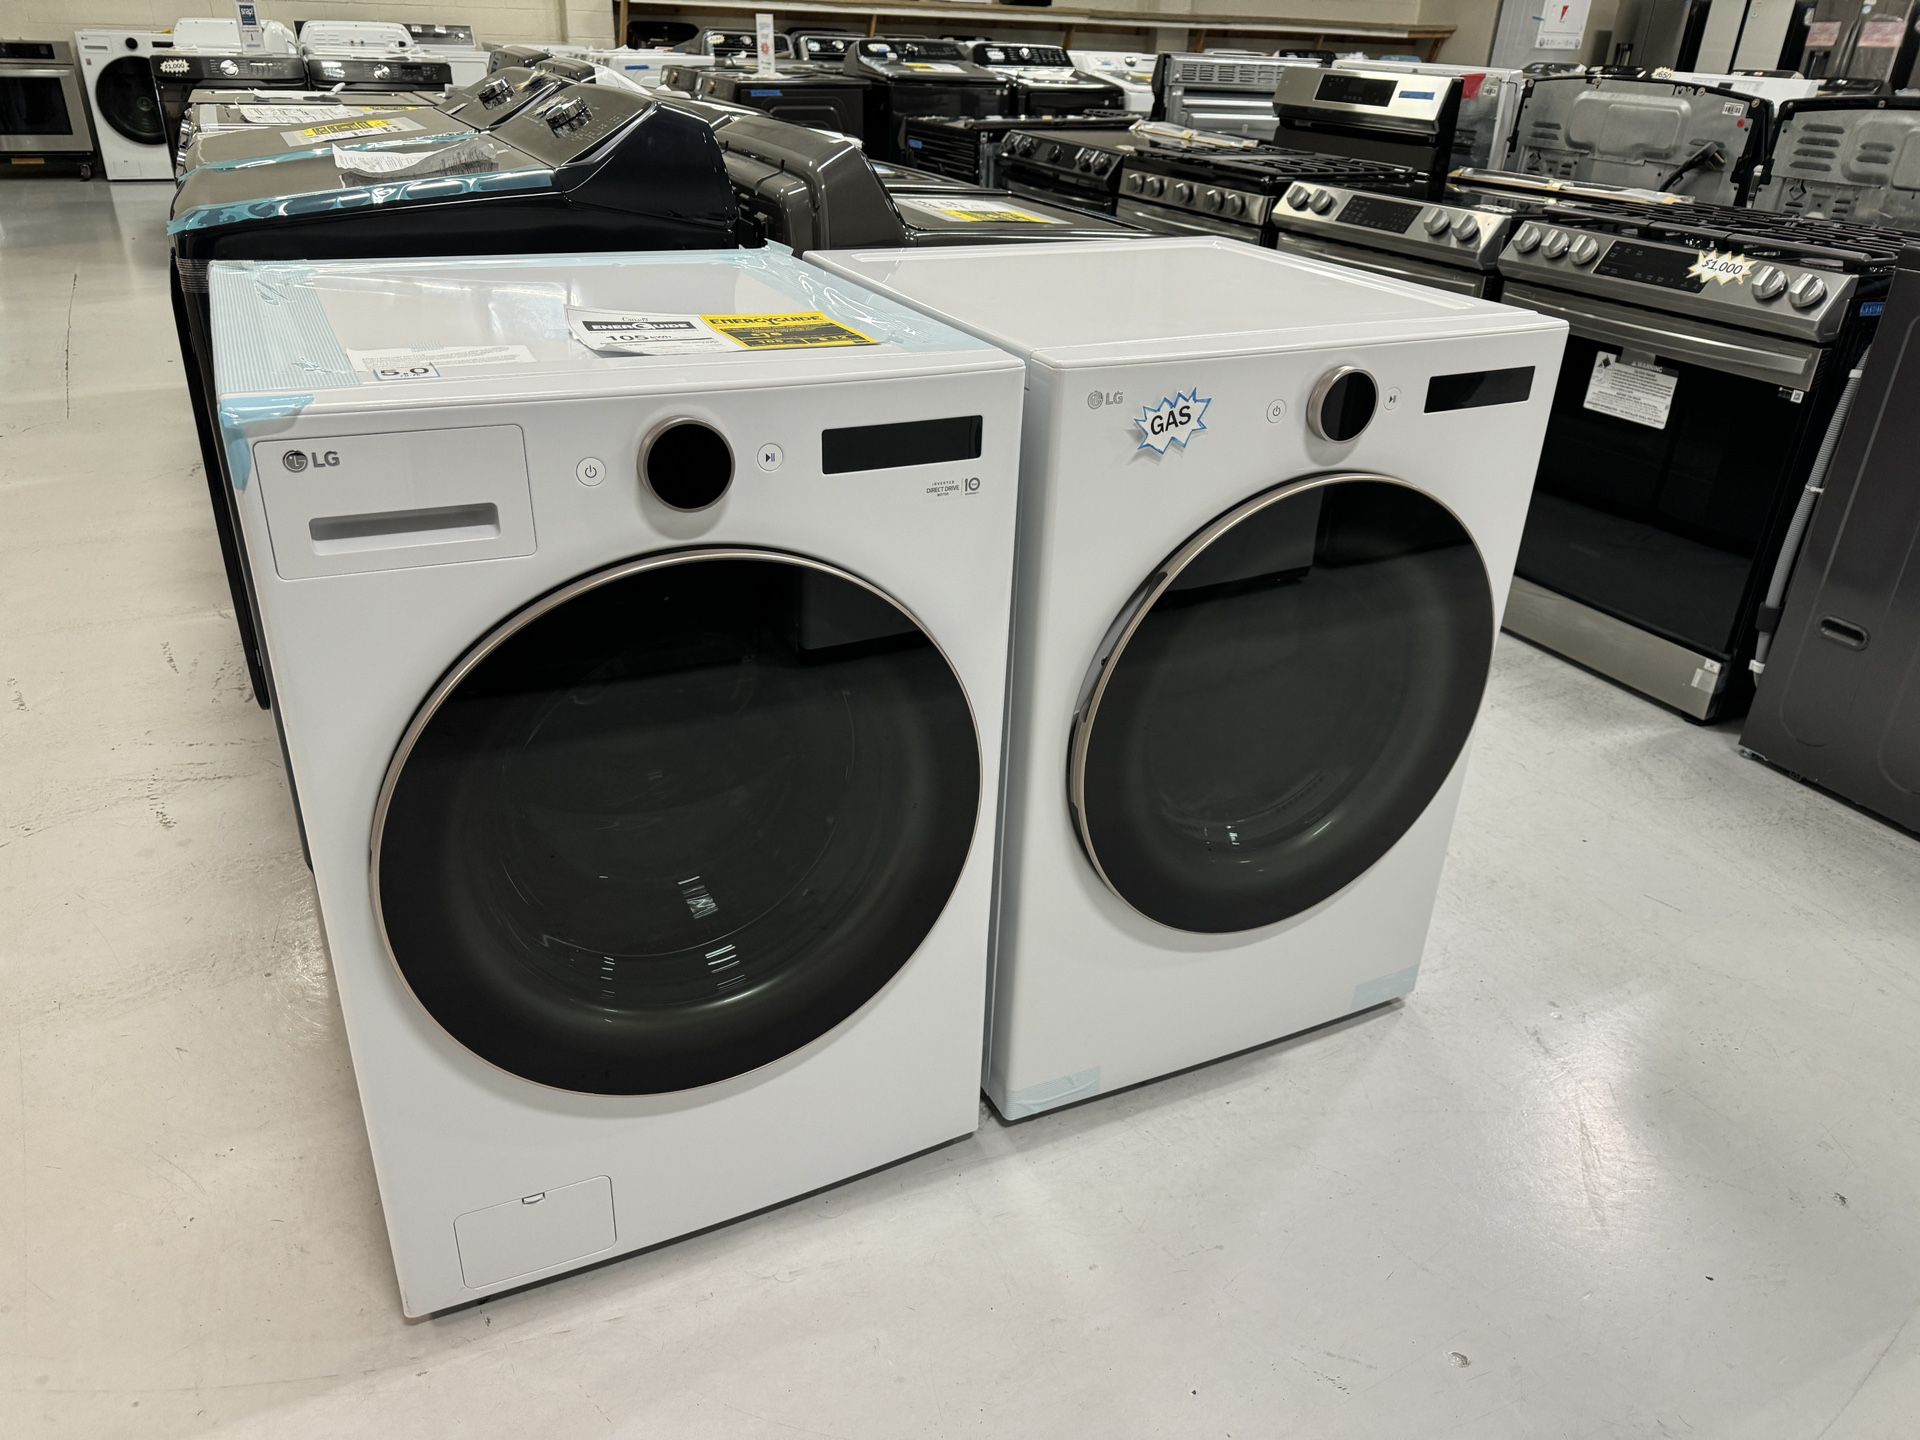 LG Washer Dryer Set New Gas White Stackable On Sale